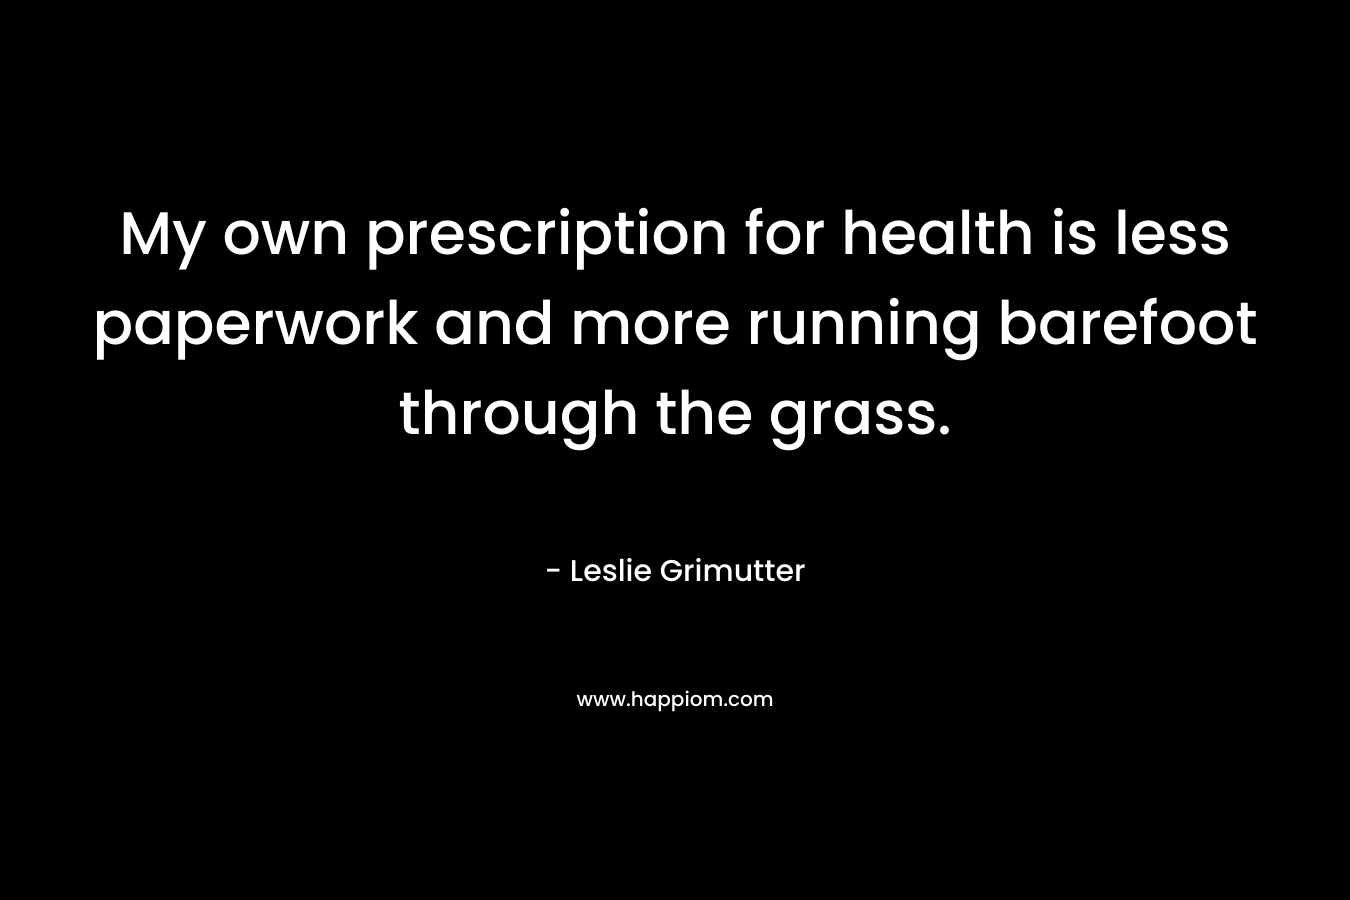 My own prescription for health is less paperwork and more running barefoot through the grass. – Leslie Grimutter